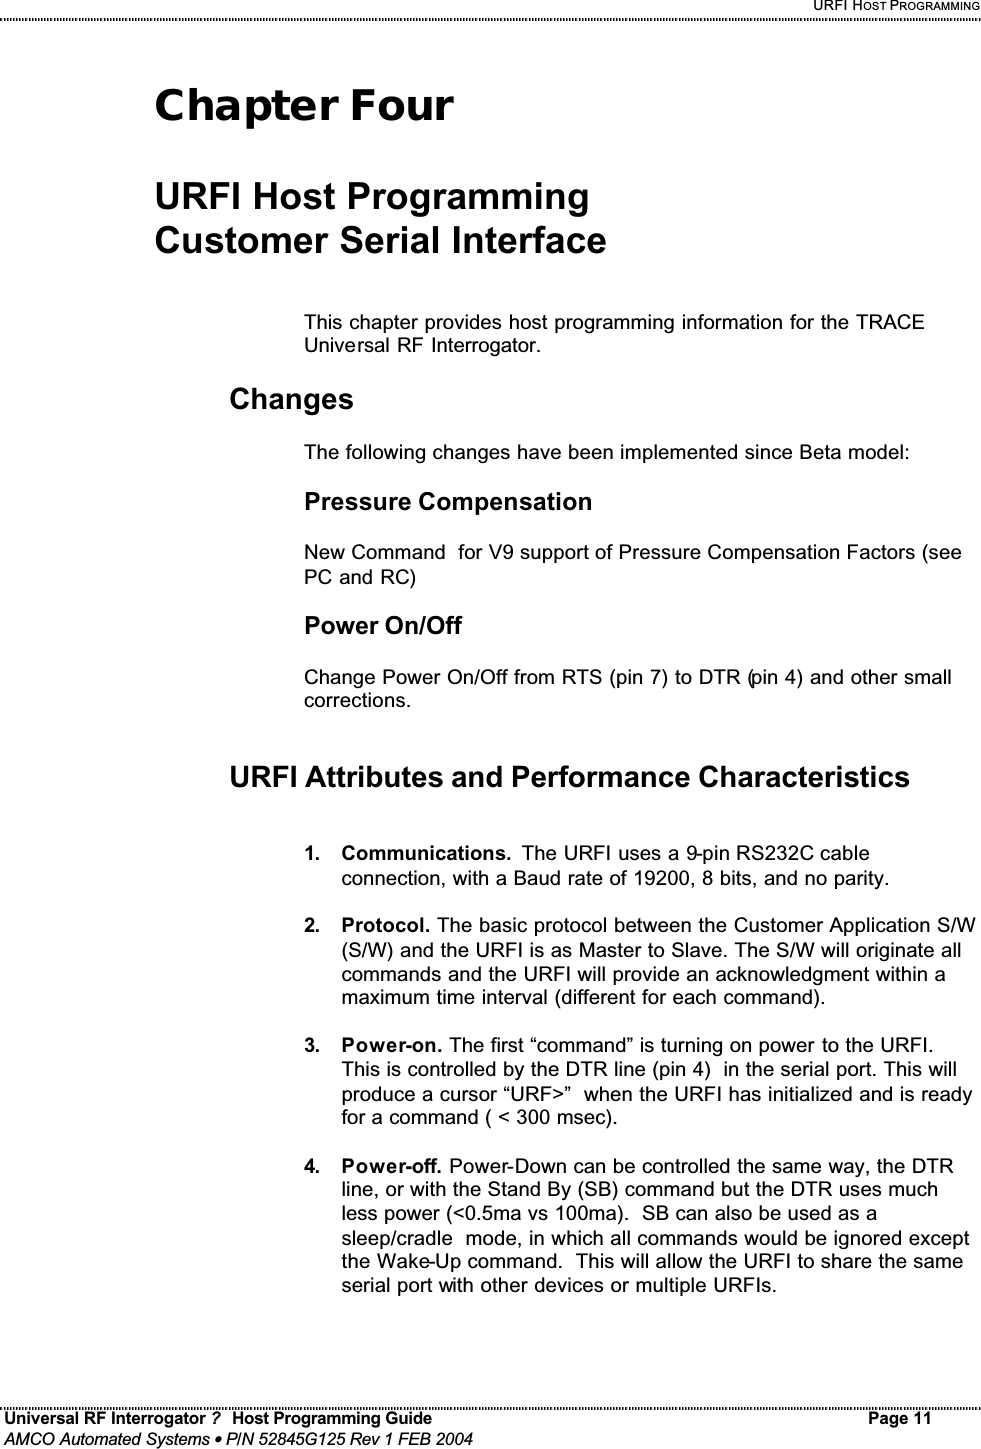     URFI HOST PROGRAMMING Universal RF Interrogator ?  Host Programming Guide Page 11  AMCO Automated Systems • P/N 52845G125 Rev 1 FEB 2004   Chapter Four  URFI Host Programming  Customer Serial Interface   This chapter provides host programming information for the TRACE Universal RF Interrogator.  Changes   The following changes have been implemented since Beta model:  Pressure Compensation  New Command  for V9 support of Pressure Compensation Factors (see PC and RC)  Power On/Off  Change Power On/Off from RTS (pin 7) to DTR (pin 4) and other small corrections.   URFI Attributes and Performance Characteristics   1.  Communications.  The URFI uses a 9-pin RS232C cable connection, with a Baud rate of 19200, 8 bits, and no parity.   2.  Protocol. The basic protocol between the Customer Application S/W (S/W) and the URFI is as Master to Slave. The S/W will originate all commands and the URFI will provide an acknowledgment within a maximum time interval (different for each command).  3.  Power-on. The first “command” is turning on power to the URFI. This is controlled by the DTR line (pin 4)  in the serial port. This will produce a cursor “URF&gt;”  when the URFI has initialized and is ready for a command ( &lt; 300 msec).  4.  Power-off. Power-Down can be controlled the same way, the DTR line, or with the Stand By (SB) command but the DTR uses much less power (&lt;0.5ma vs 100ma).  SB can also be used as a sleep/cradle  mode, in which all commands would be ignored except the Wake-Up command.  This will allow the URFI to share the same serial port with other devices or multiple URFIs. 